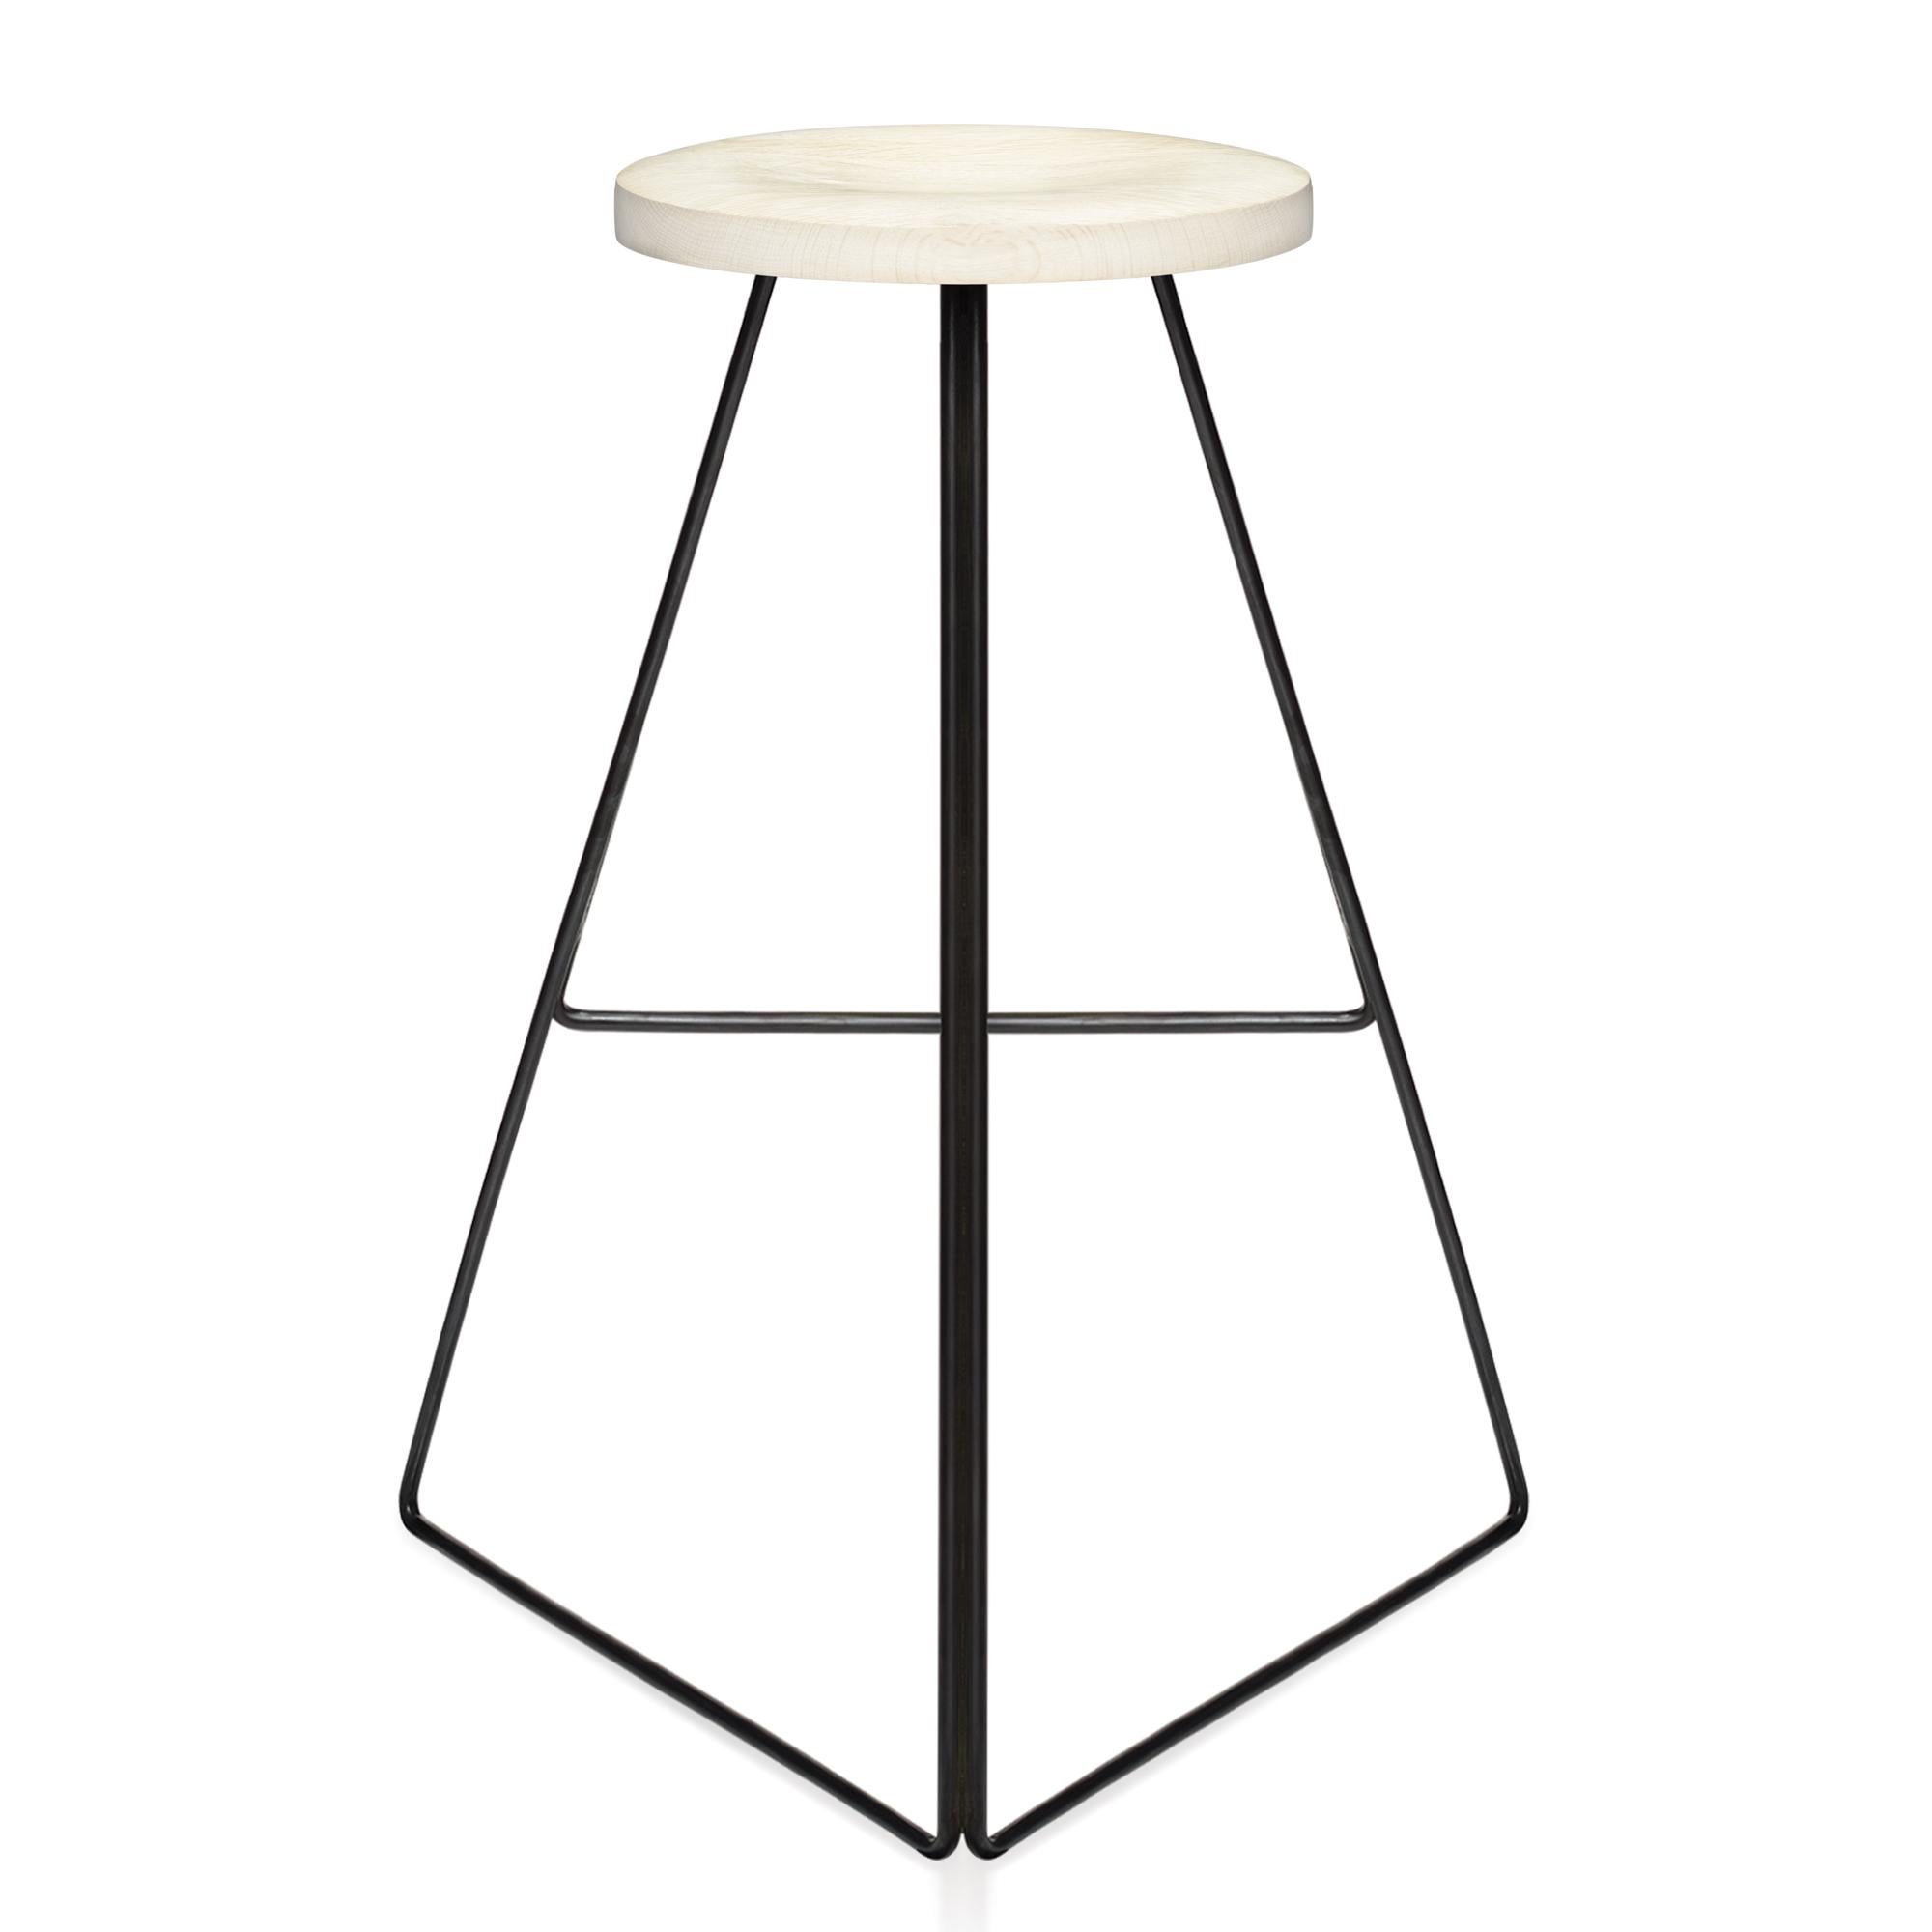 Concrete The Coleman Stool - Black and Maple, Counter Height. 54 Variations Available. For Sale